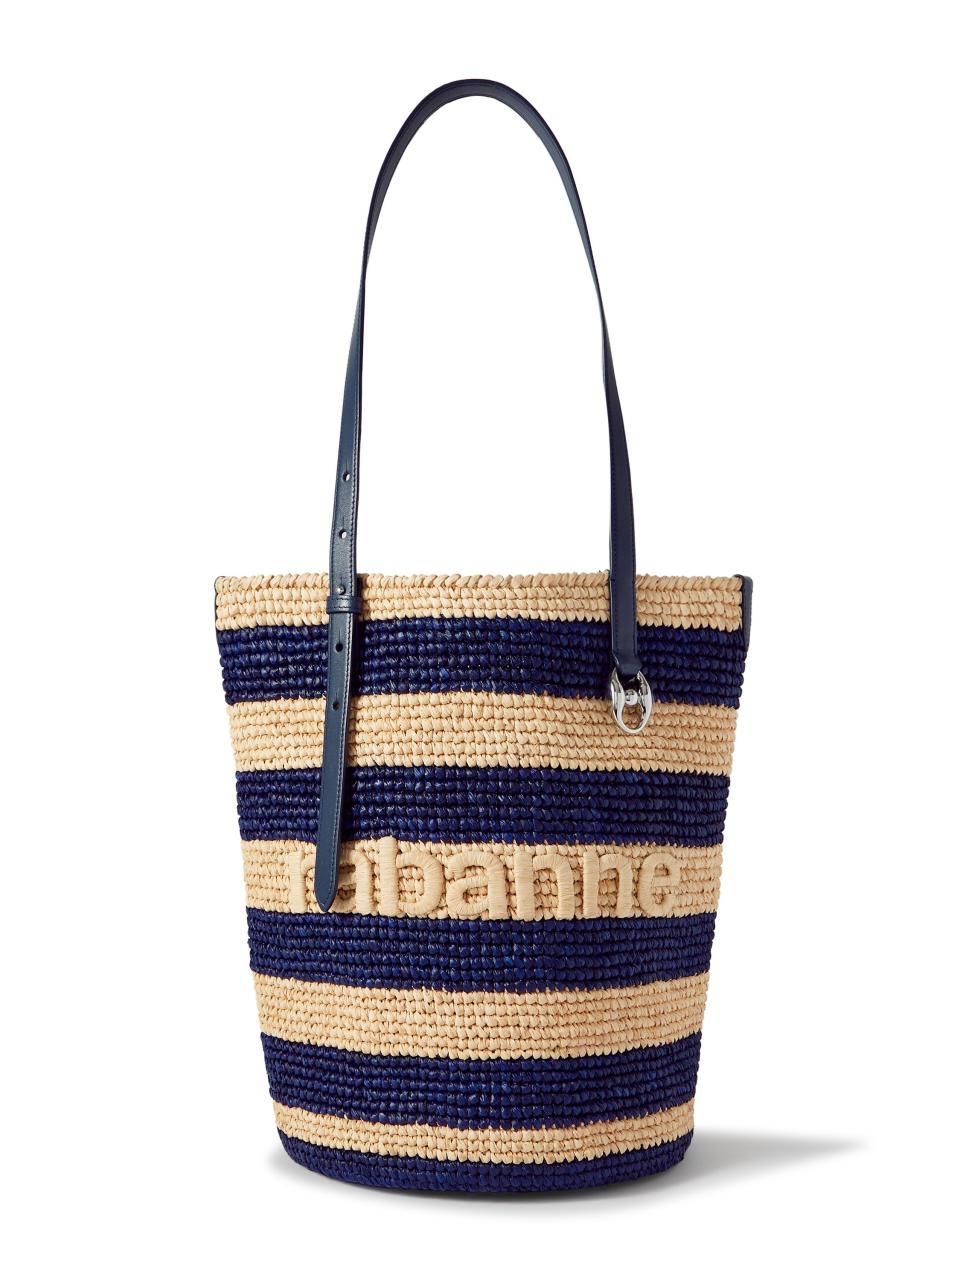 A bag from Rabanne's capsule collection with Net-a-porter.